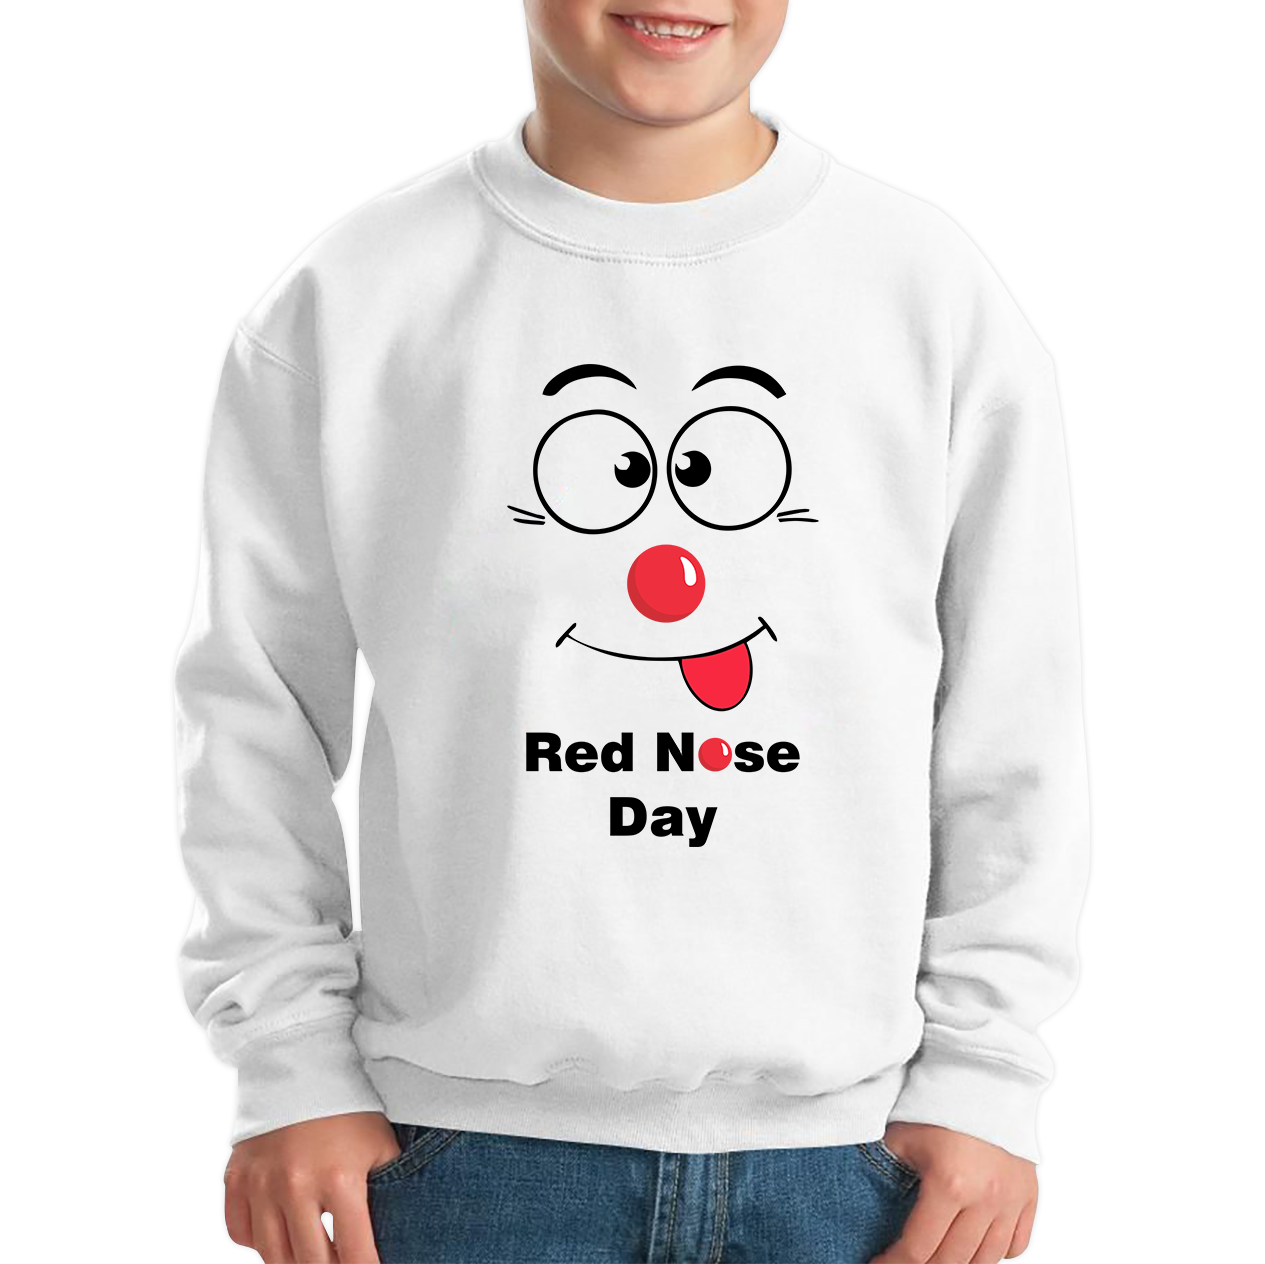 Funny Emoji Face Red Nose Day Kids Sweatshirt. 50% Goes To Charity